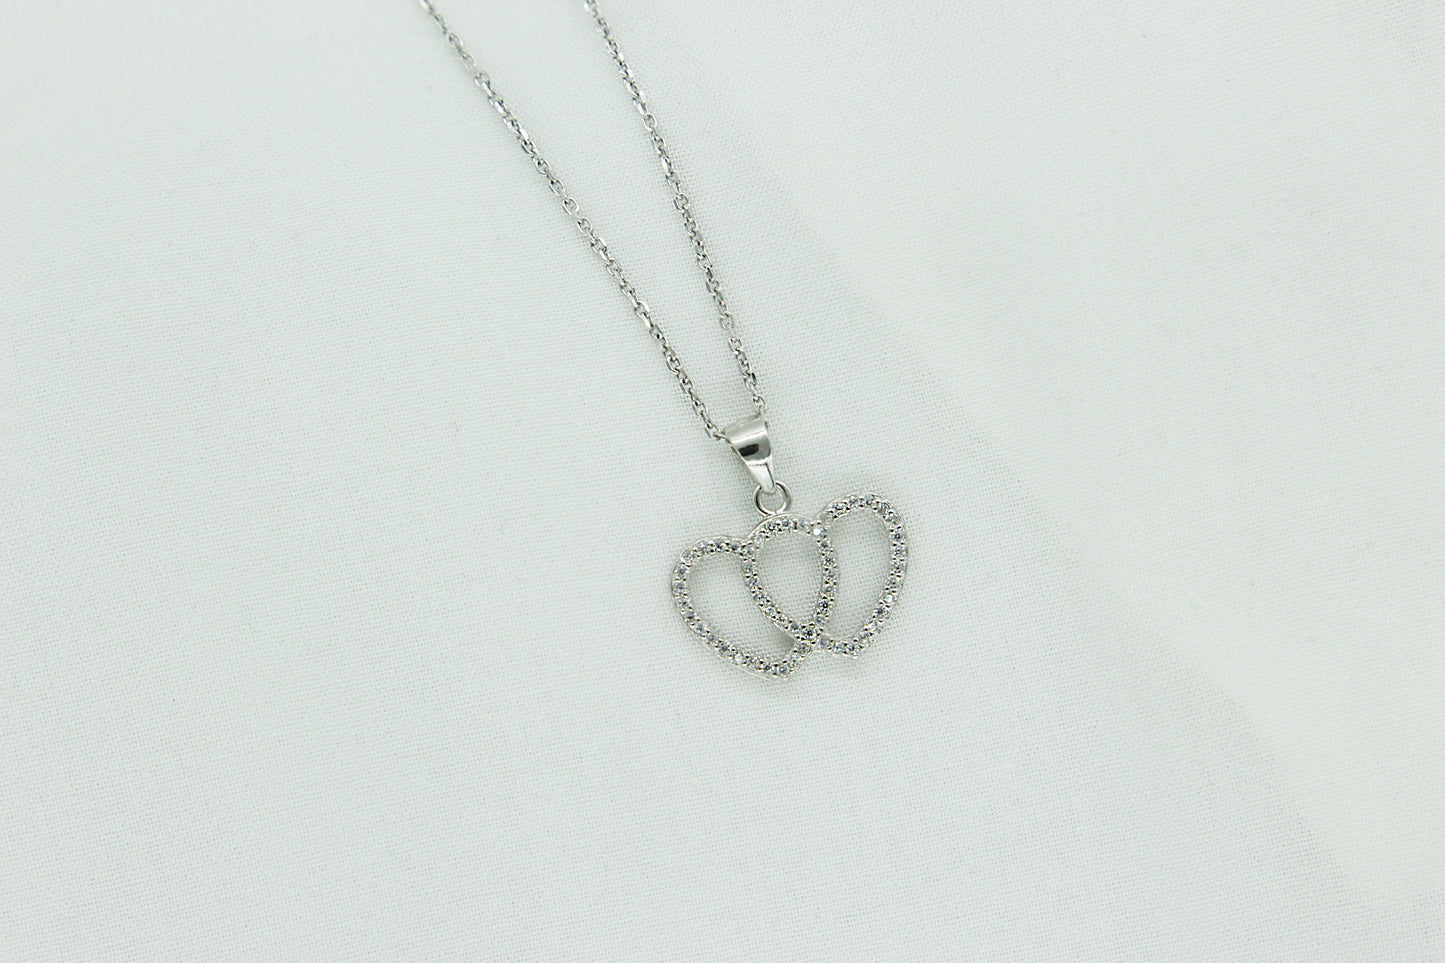 Joined Heart Necklace in Sterling Silver